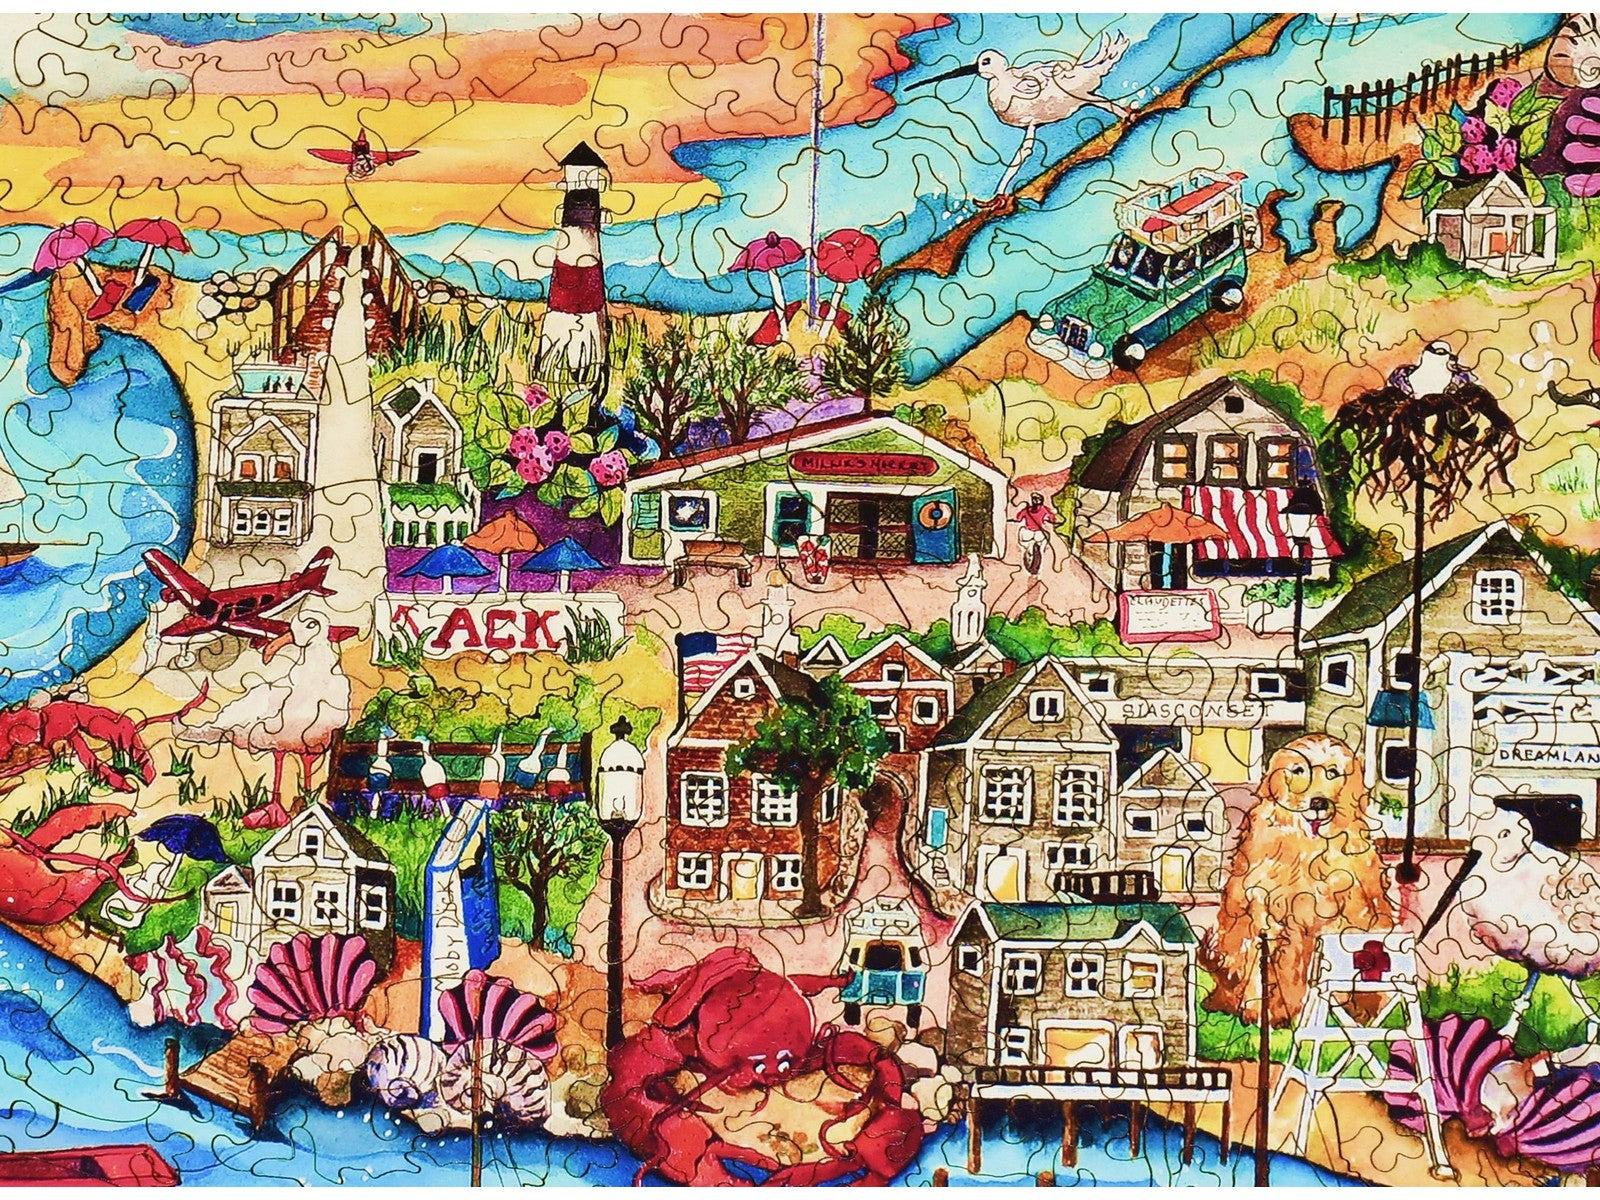 A closeup of the front of the puzzle, Nantucket, showing the detail in the pieces.